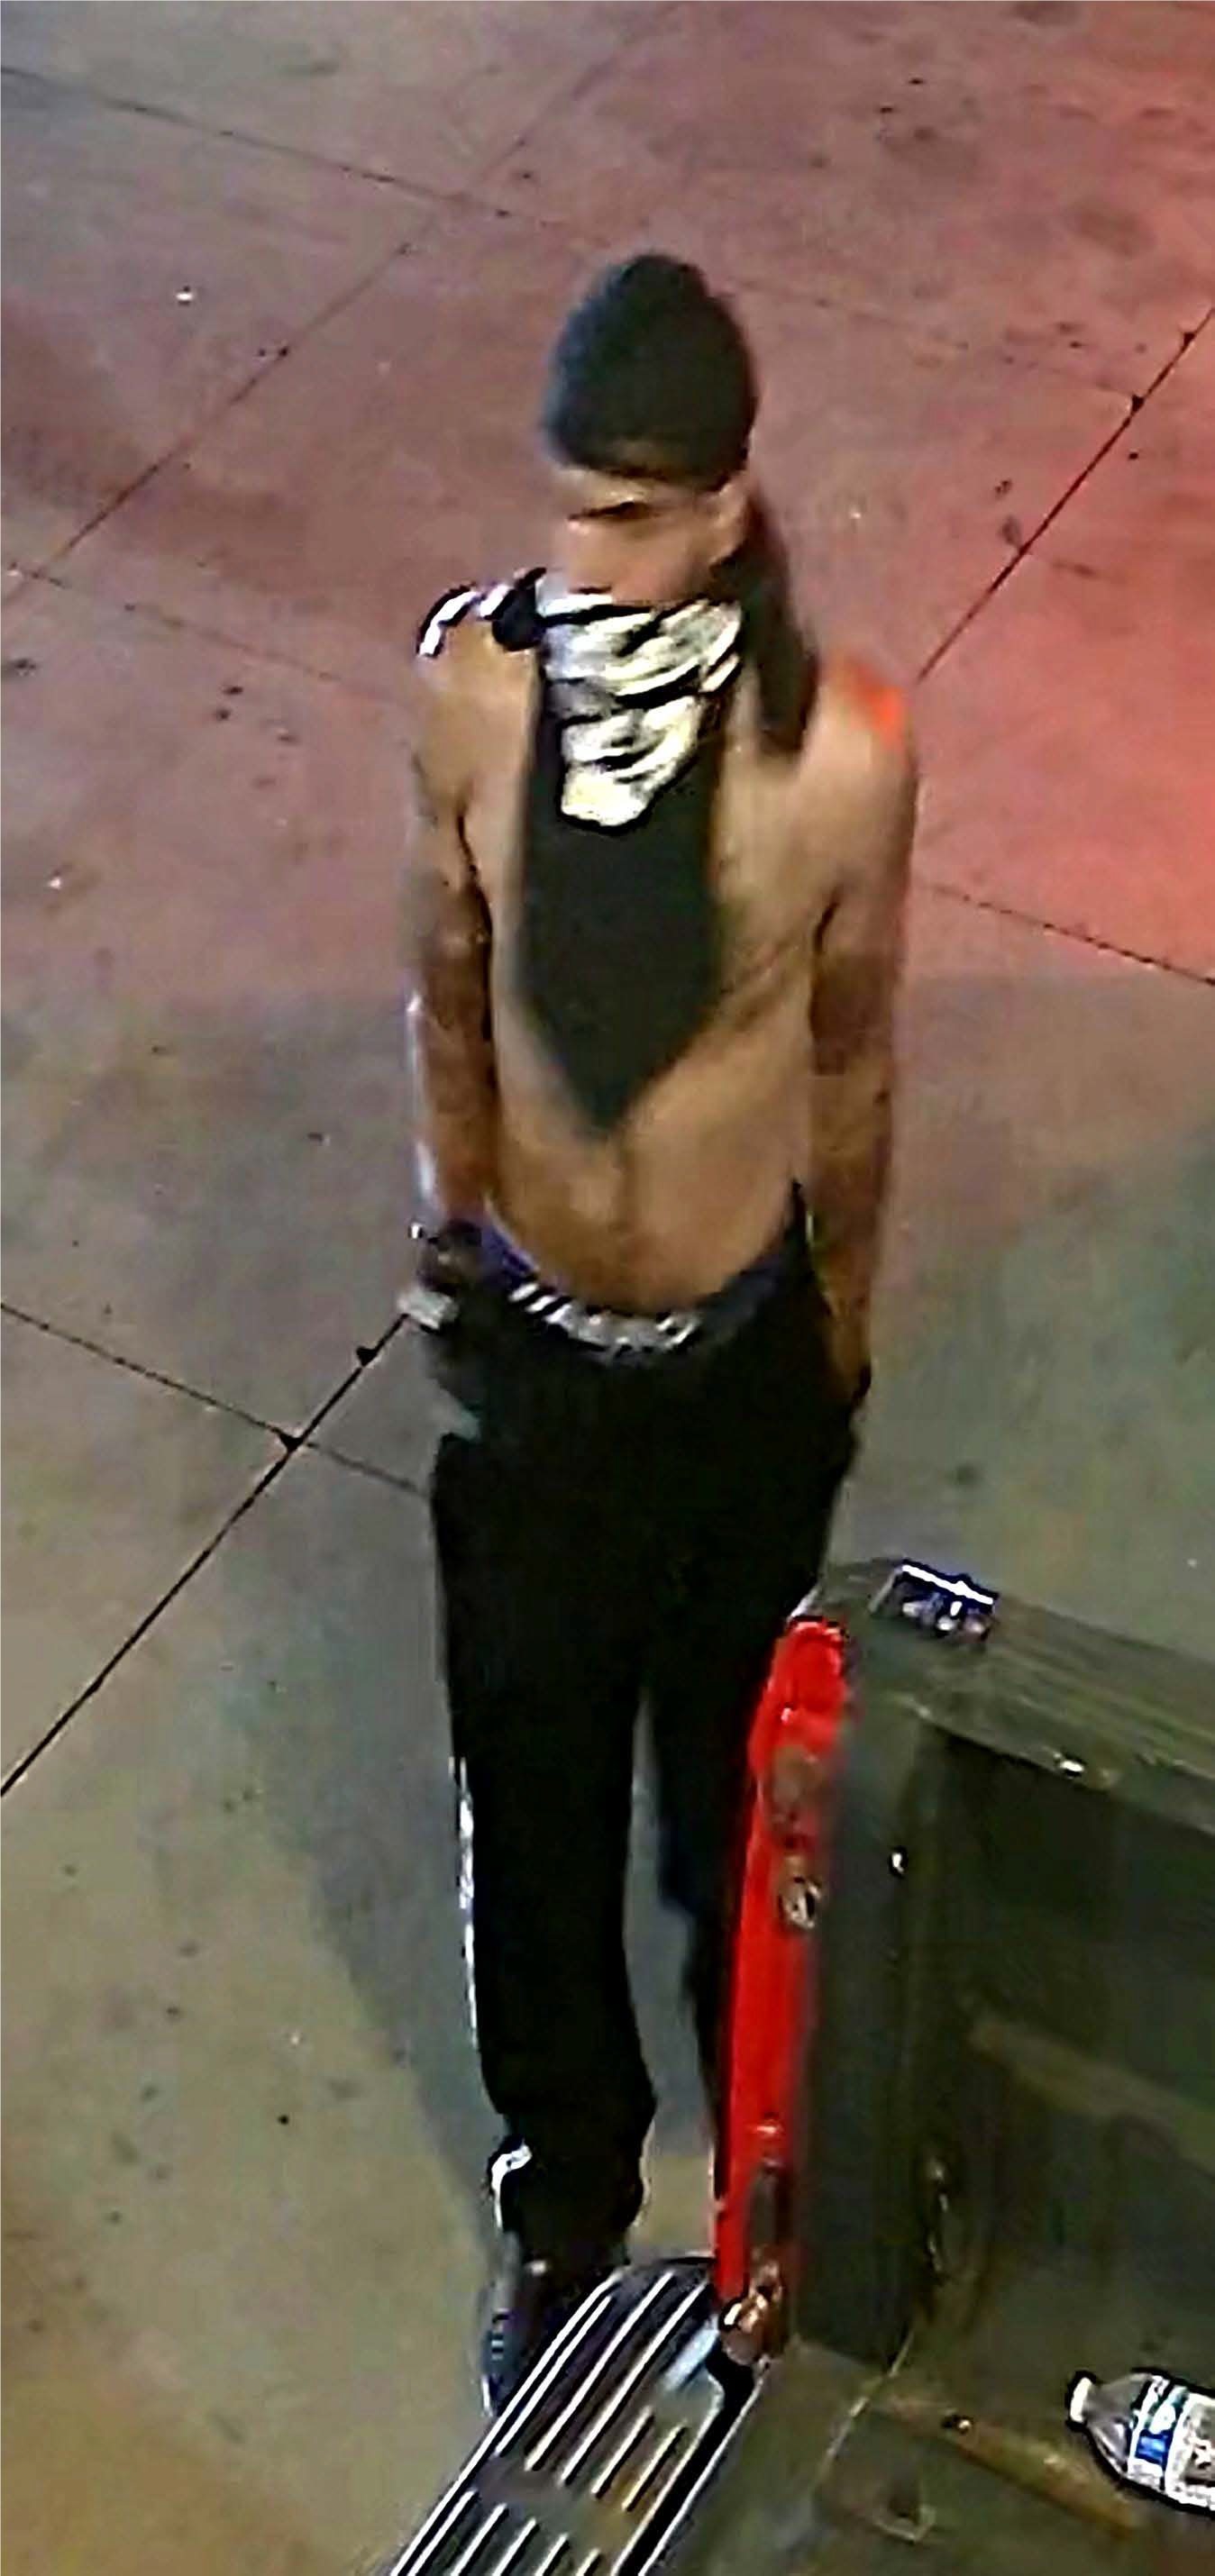 Male with no shirt, black pants, black hat and black t-shirt tied around the lower half of his face, identified as UNSUB #30.